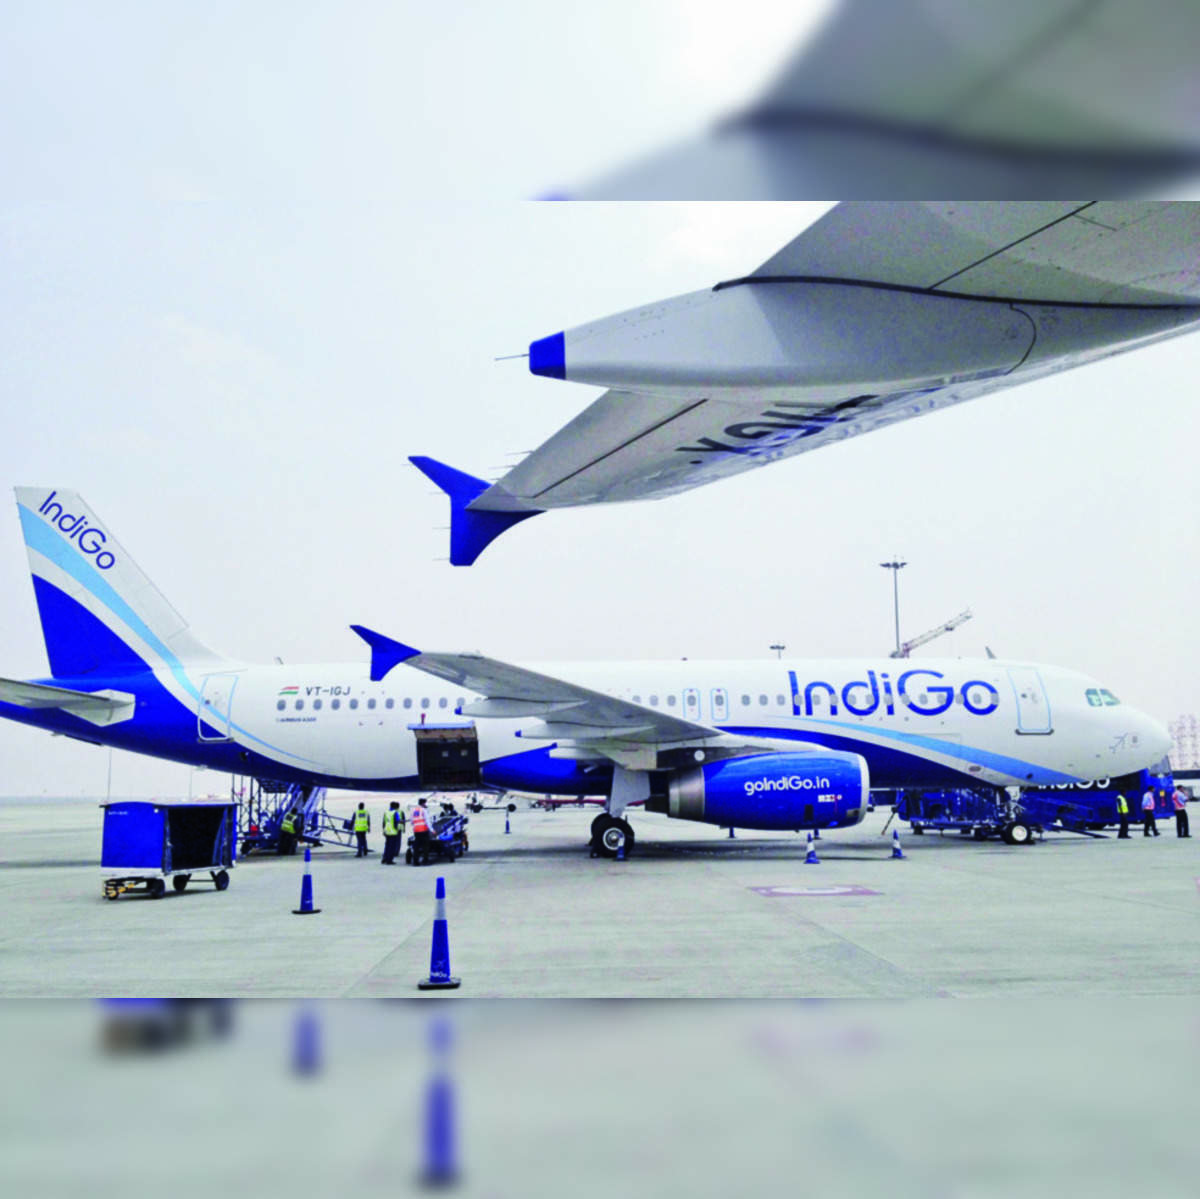 indigo international flights: IndiGo is back with a bang, looking to start  flights to many international destinations: CEO Pieter Elbers - The  Economic Times